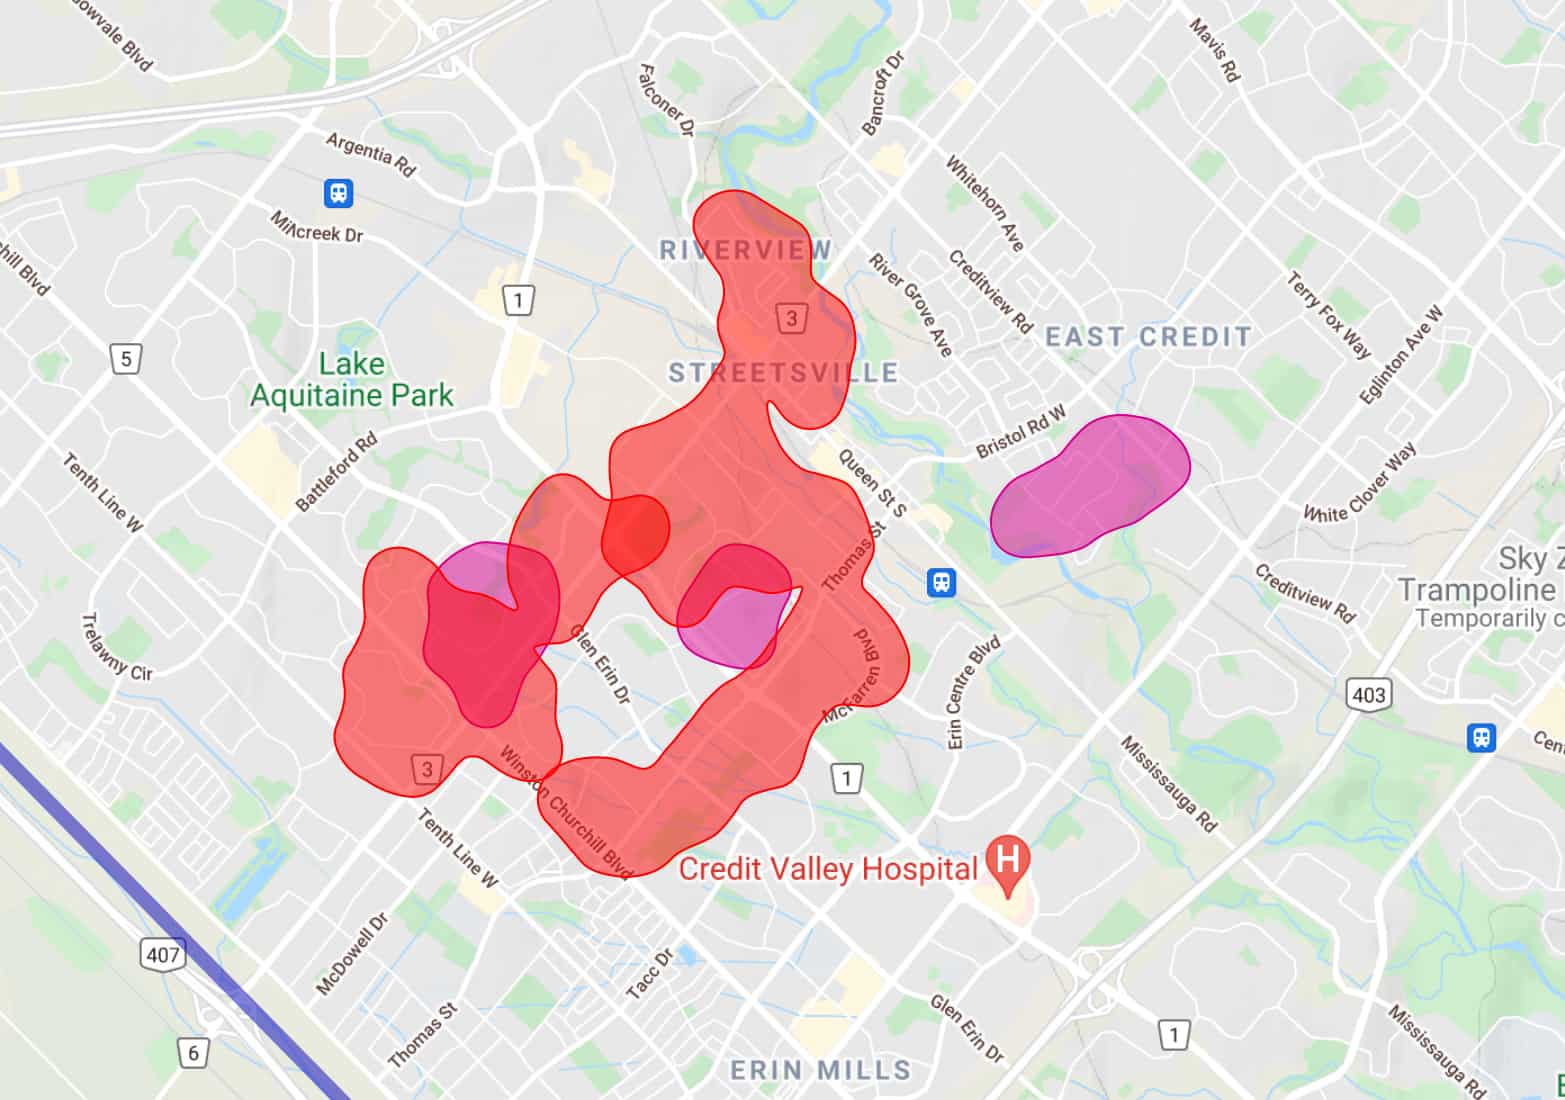 Streetsville power outage